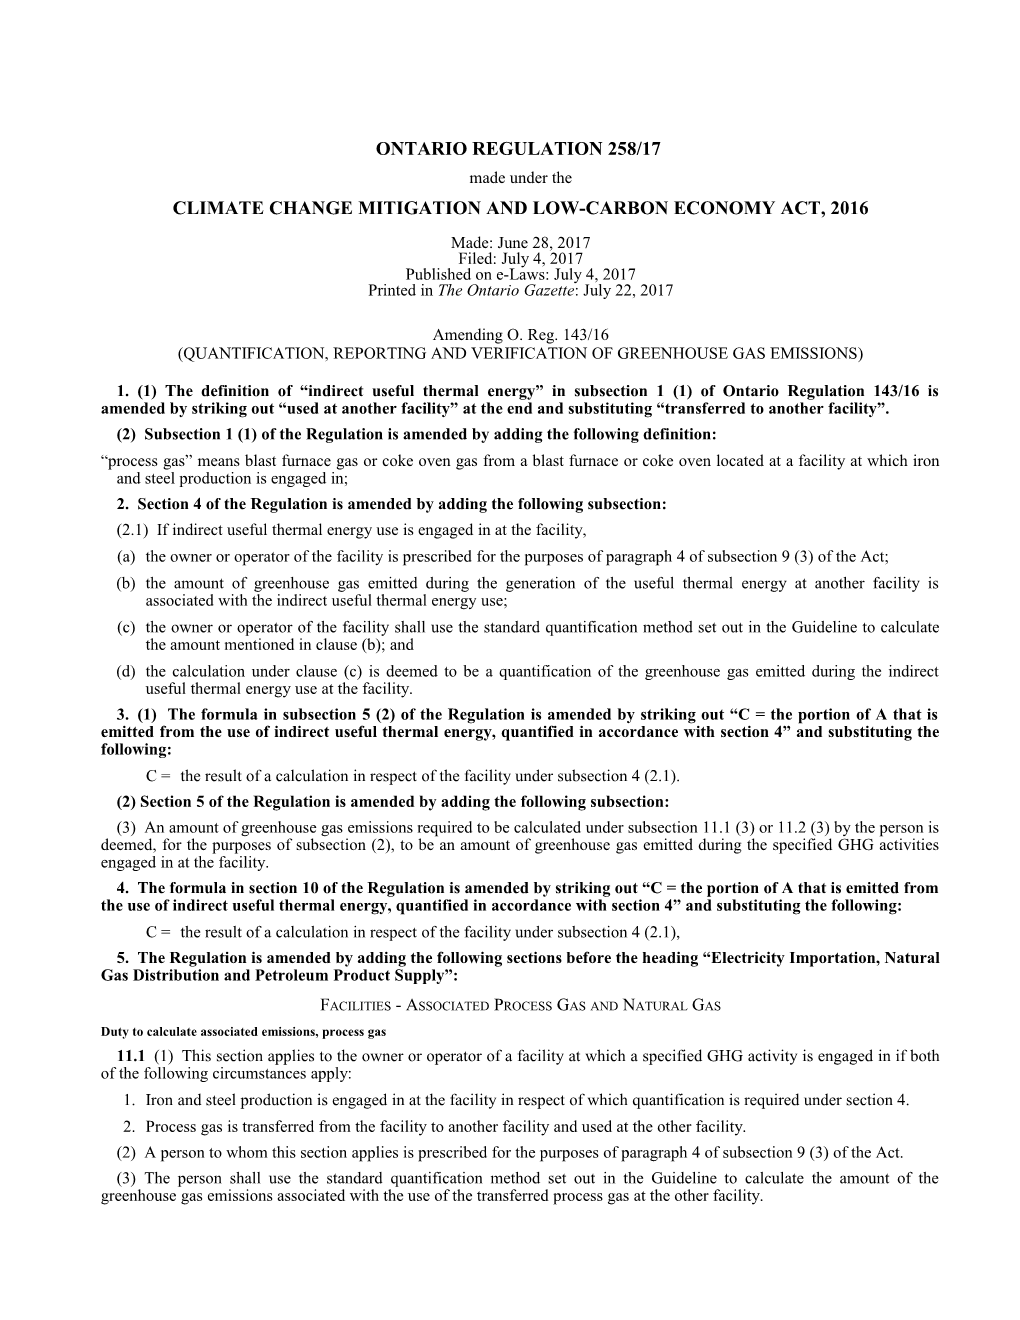 CLIMATE CHANGE MITIGATION and LOW-CARBON ECONOMY ACT, 2016 - O. Reg. 258/17